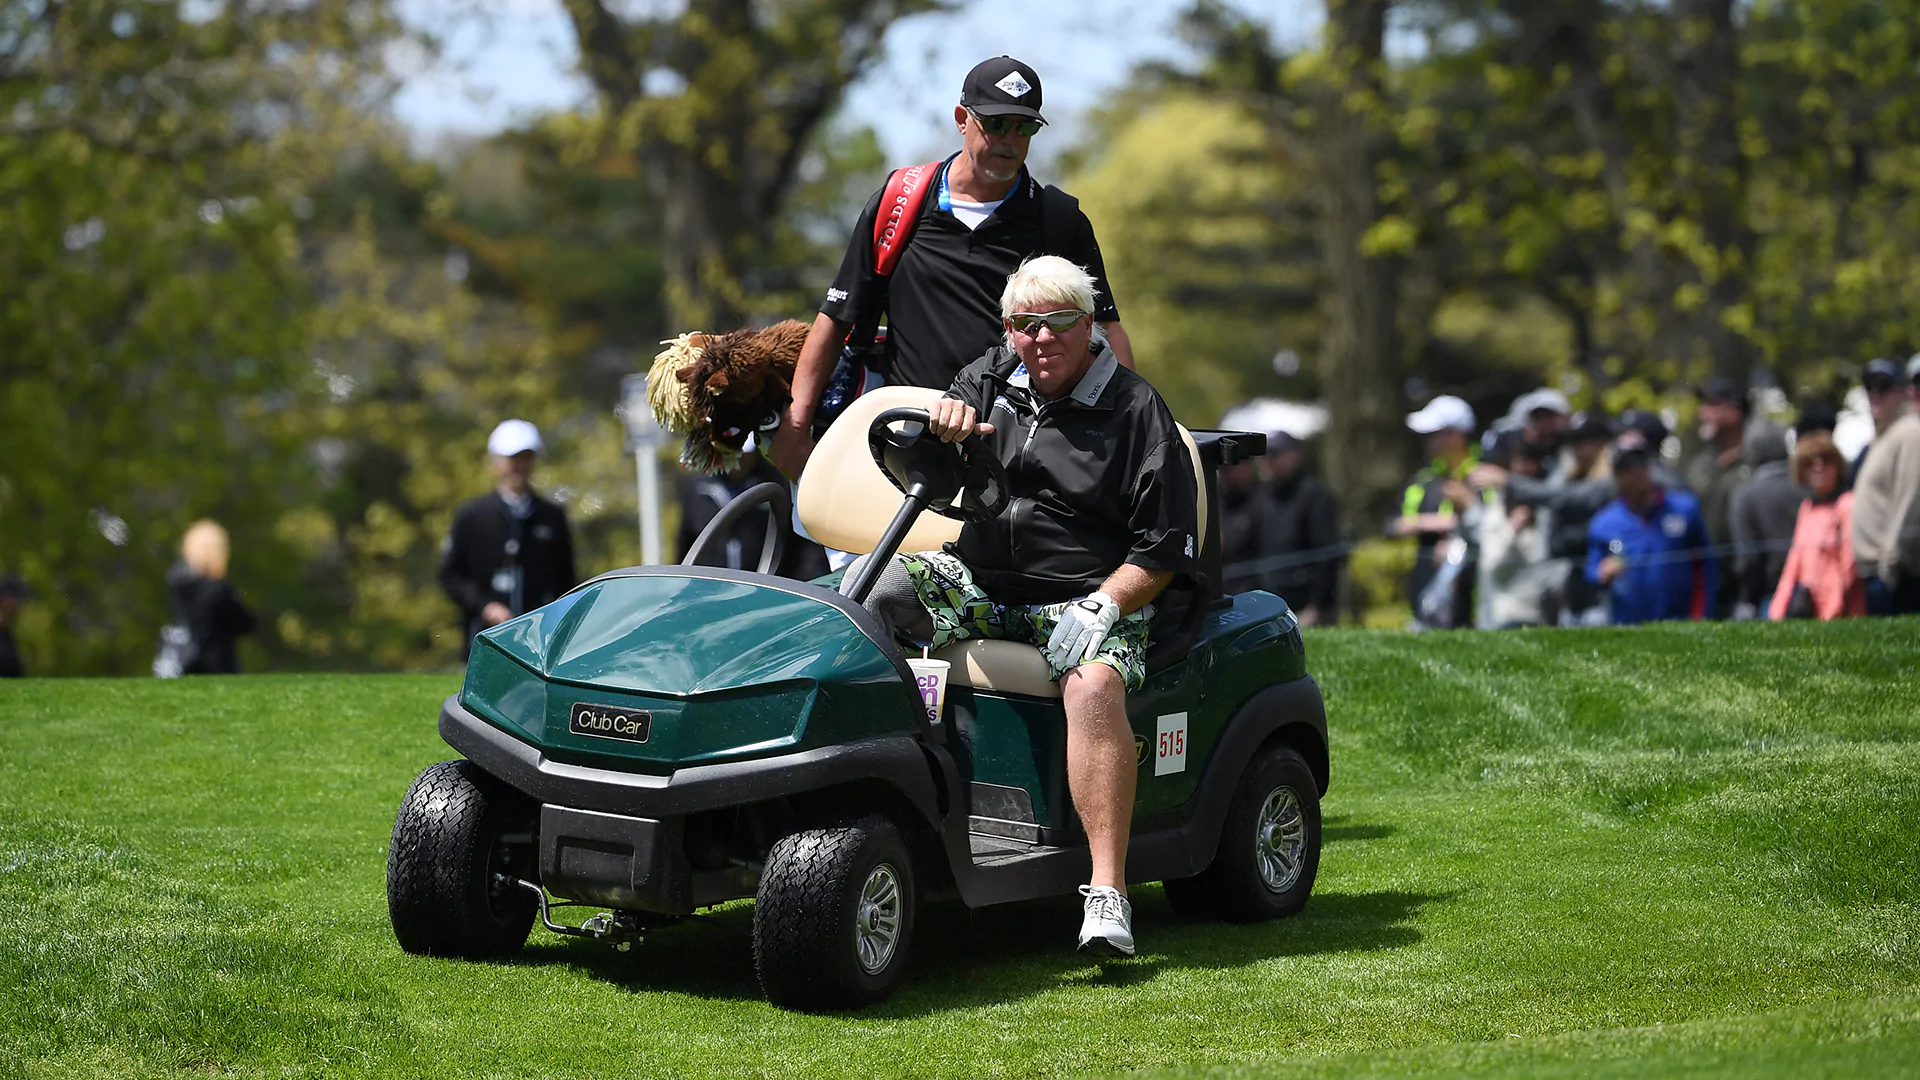 John Daly: Playing with cart a ‘distraction,’ still ‘not even easy’ but needs it to play – Golf Channel